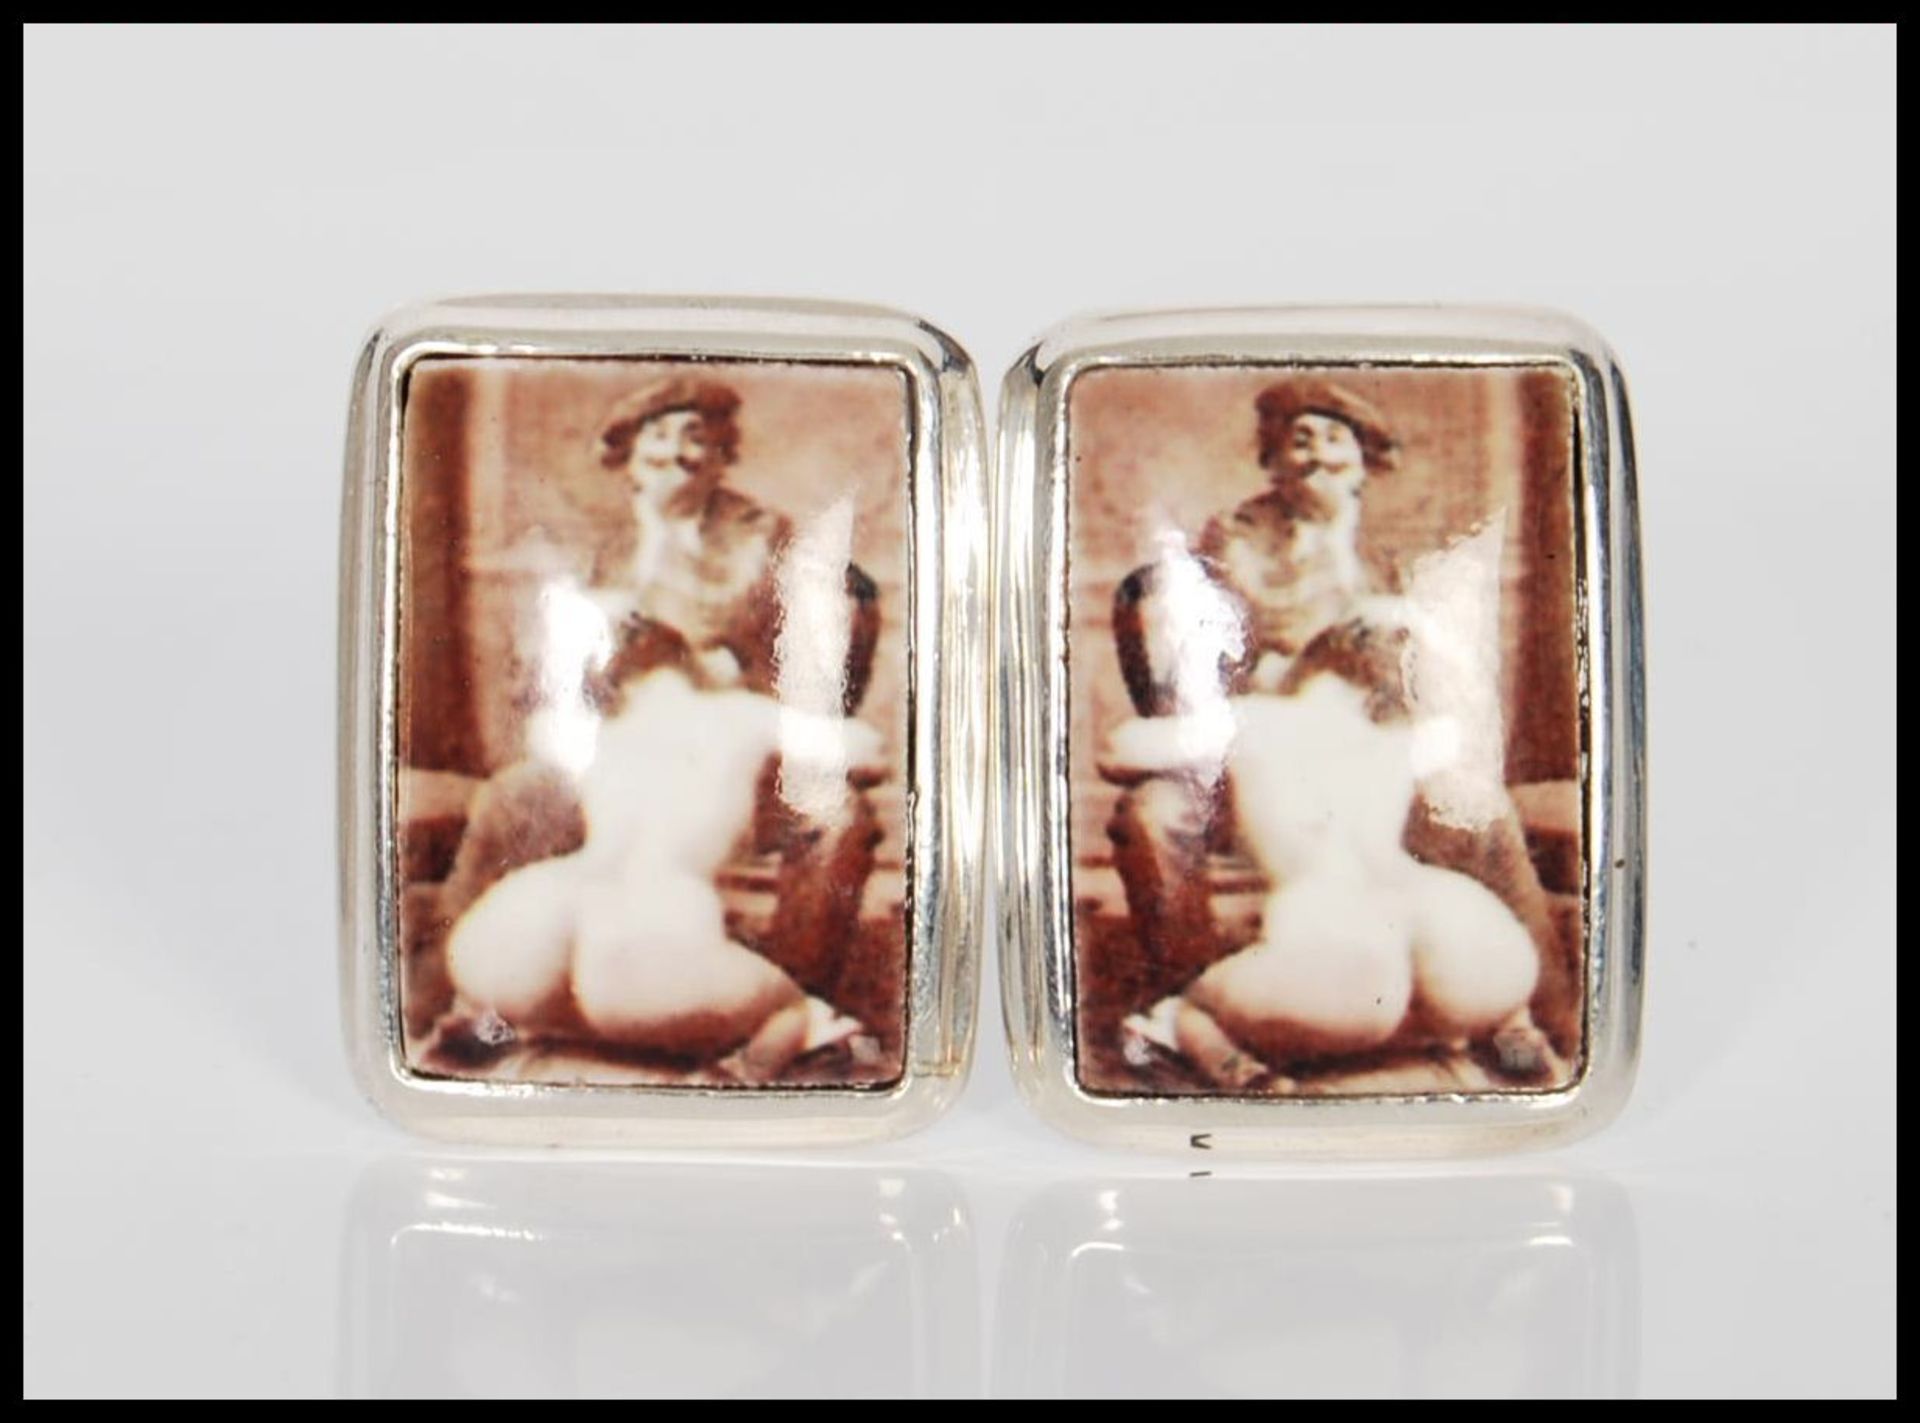 A pair of sterling silver and enamel cufflinks depicting an erotic scene involving a nude lady.